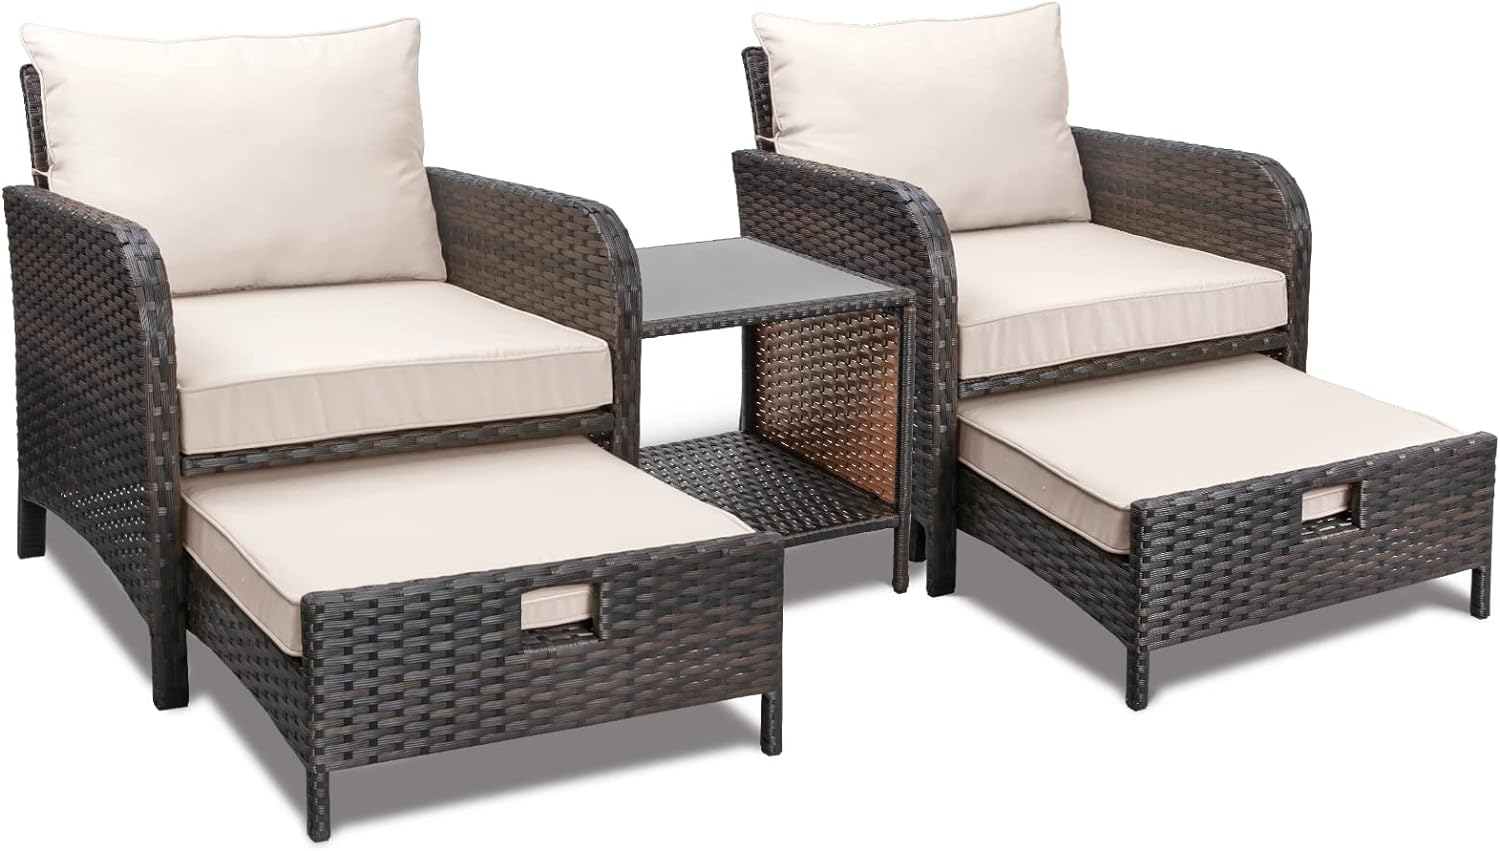 5 Piece Patio Conversation Set with Wicker Rattan Outdoor Lounge Chairs, Soft Cushions, Ottoman, Glass Table